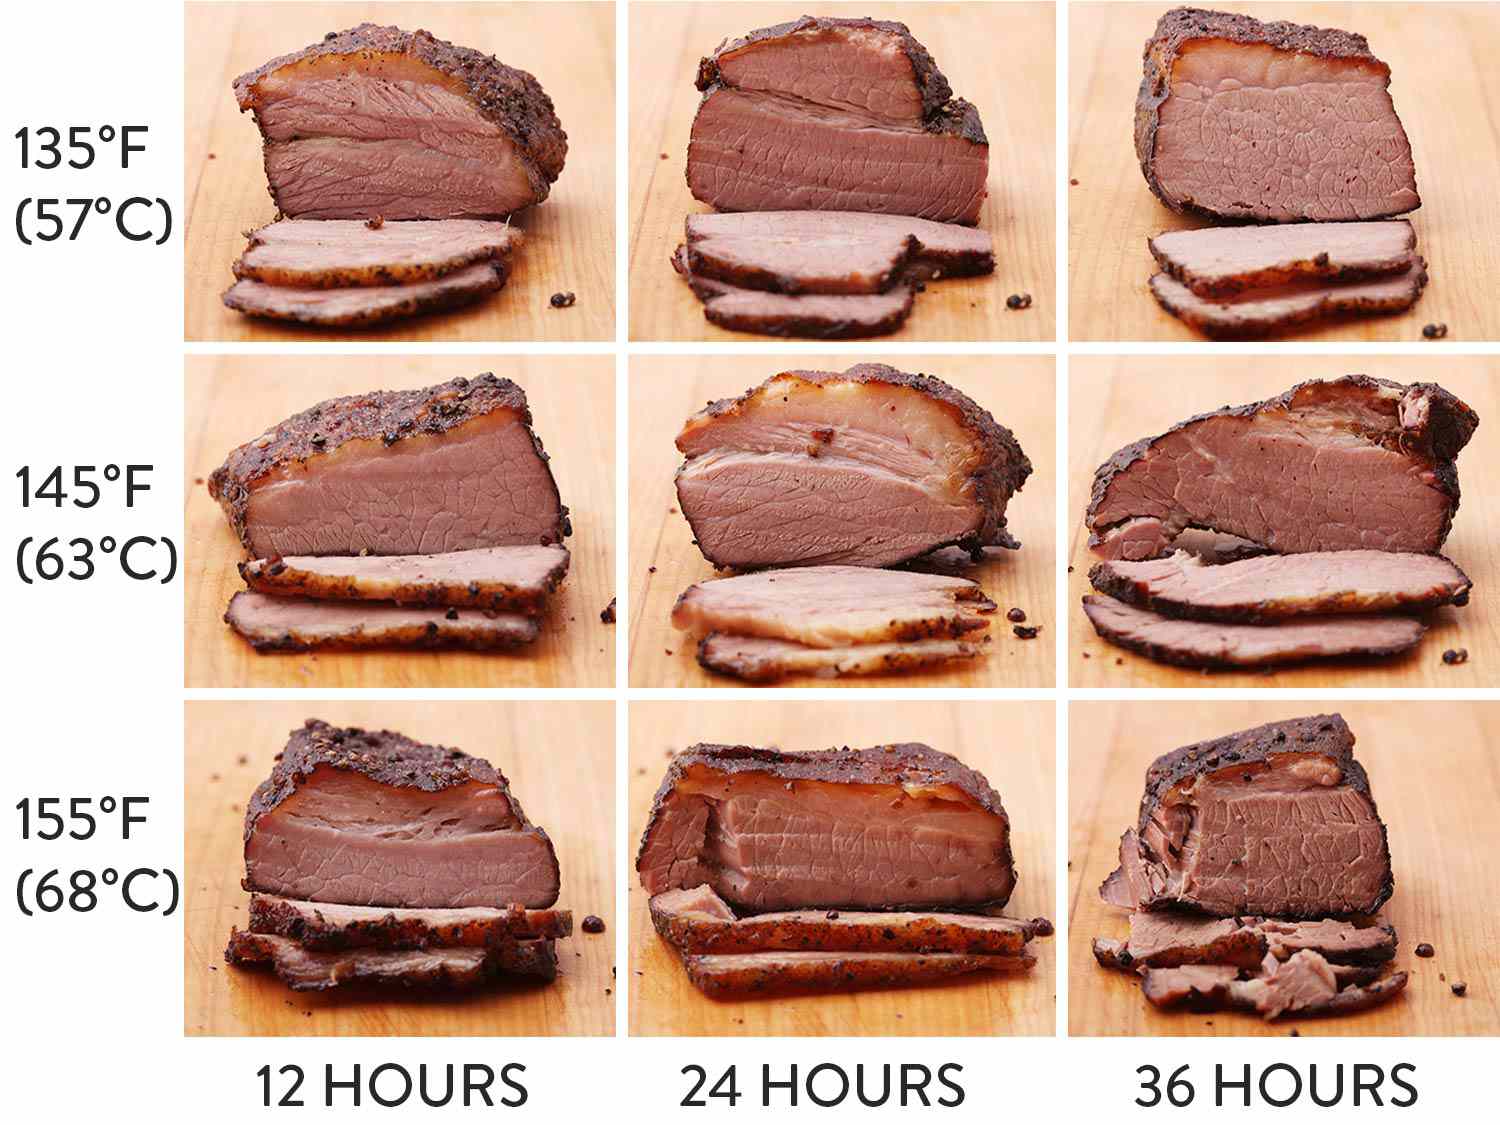 A composite image showing briskets cooked sous vide to various temperatures for various times, to illustrate texture differences